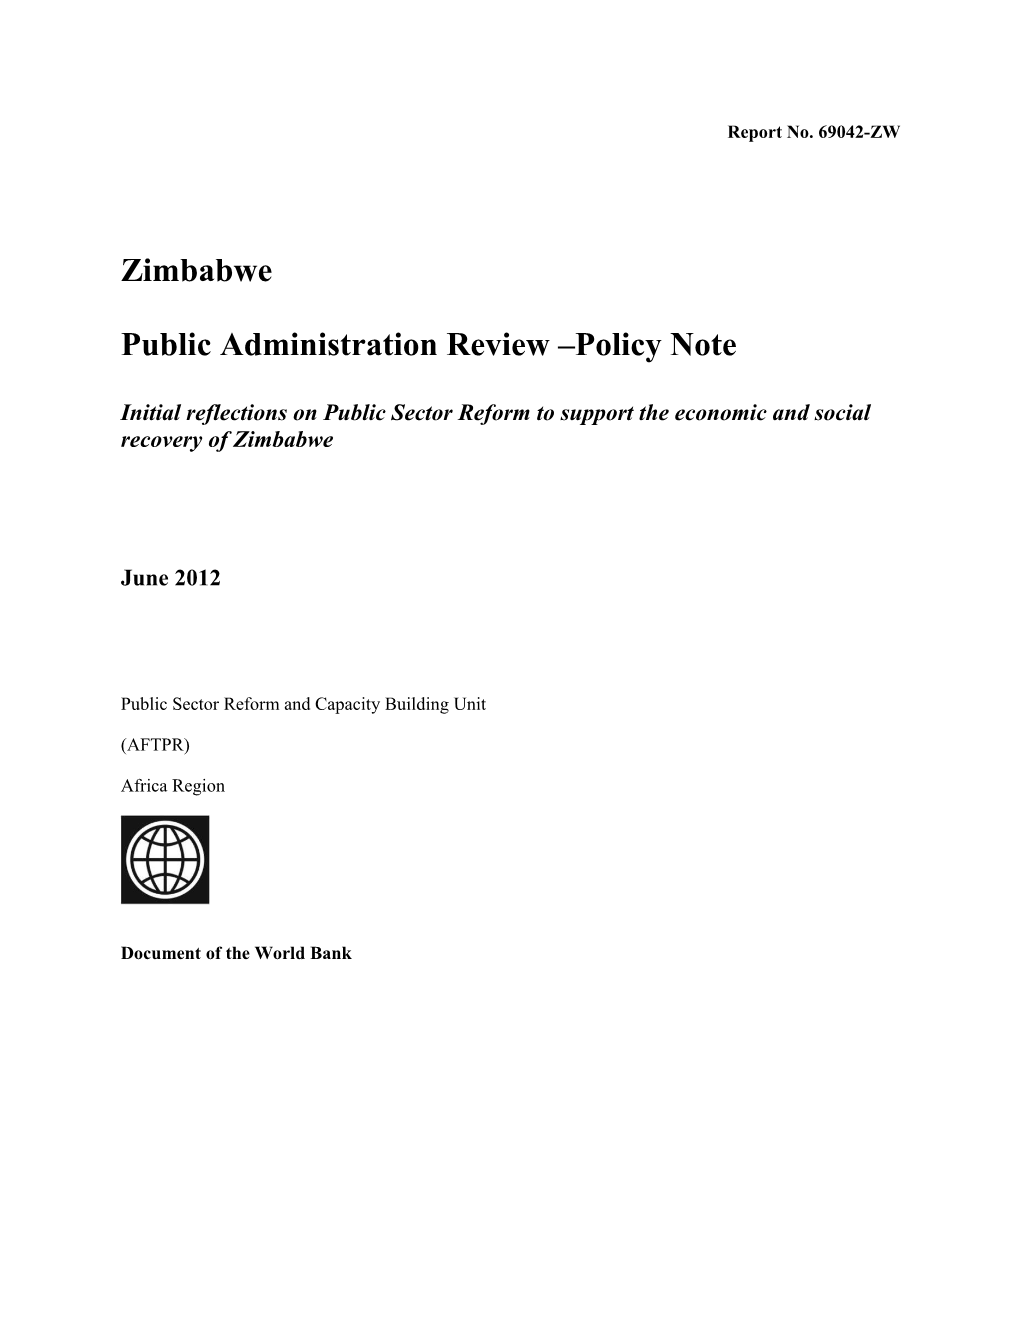 Public Administration Review Policy Note